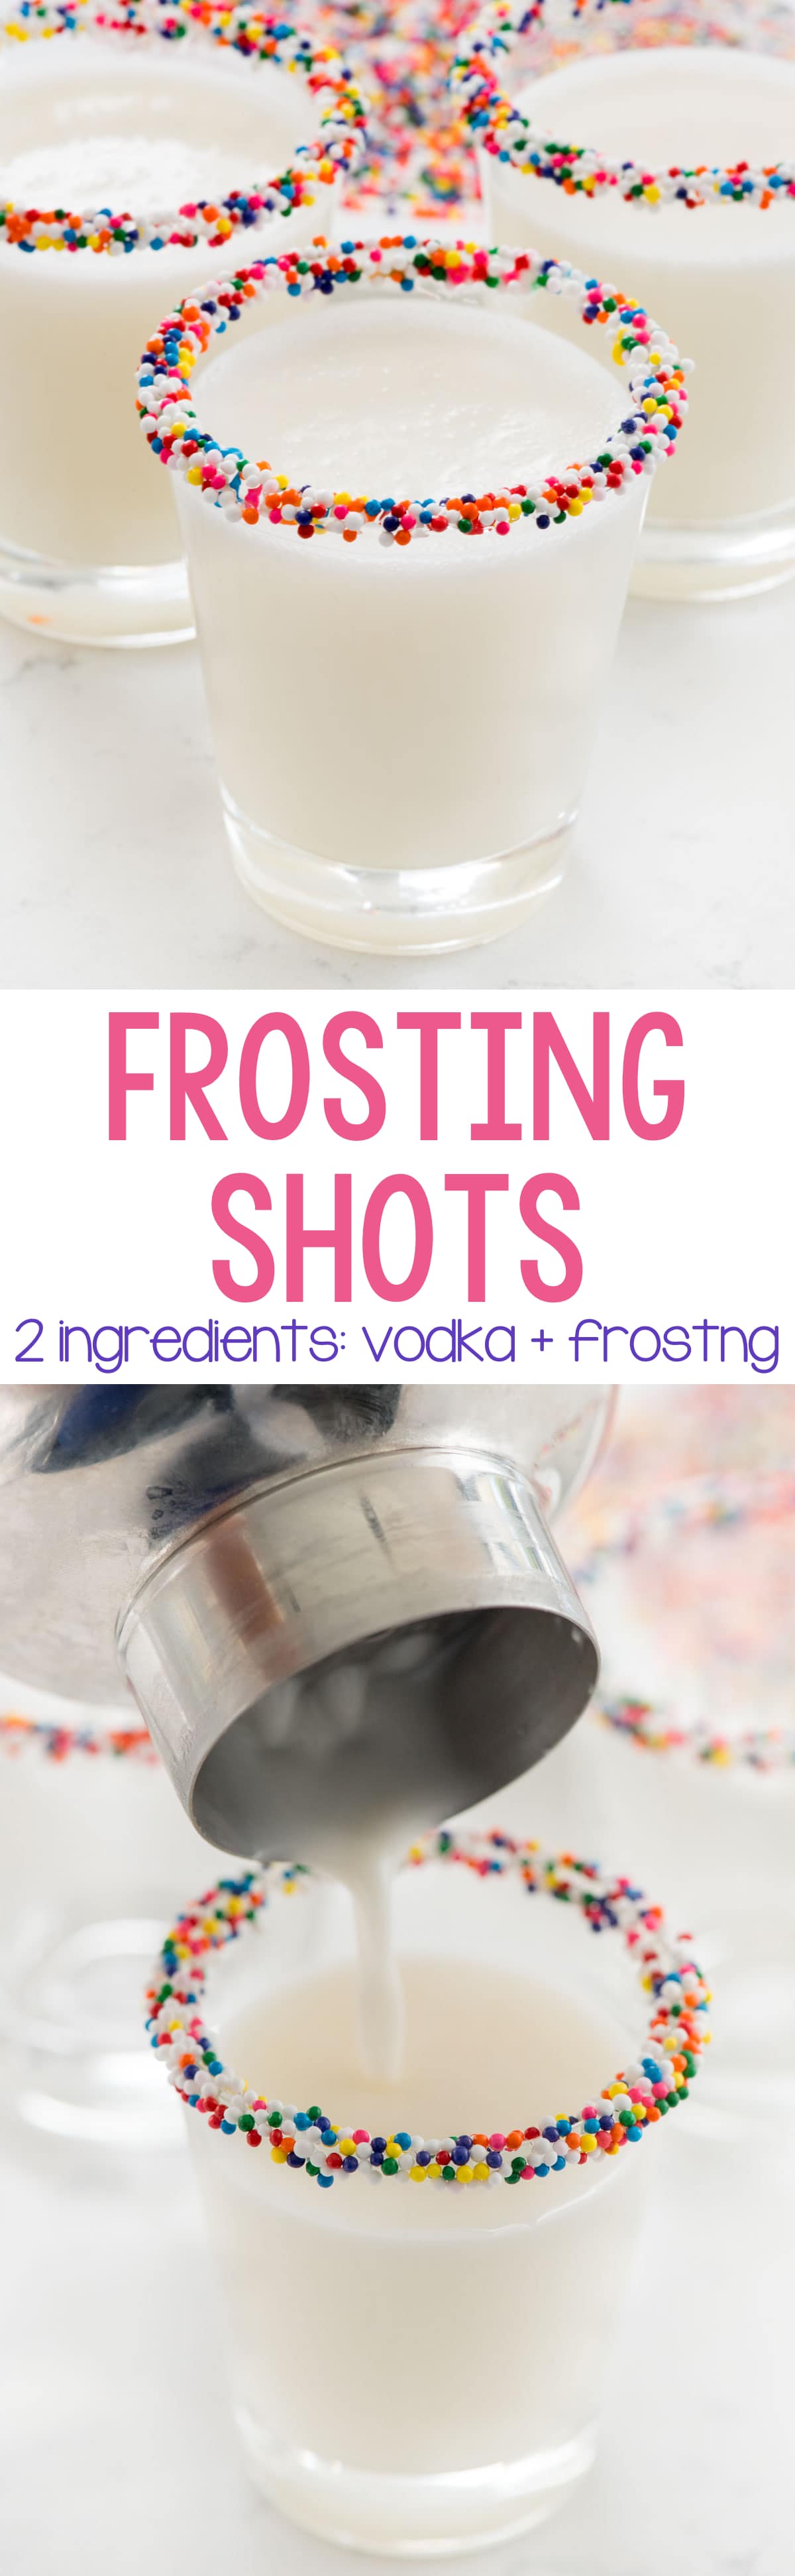 photo collage - Pouring Frosting Shots Into a Shot Glass